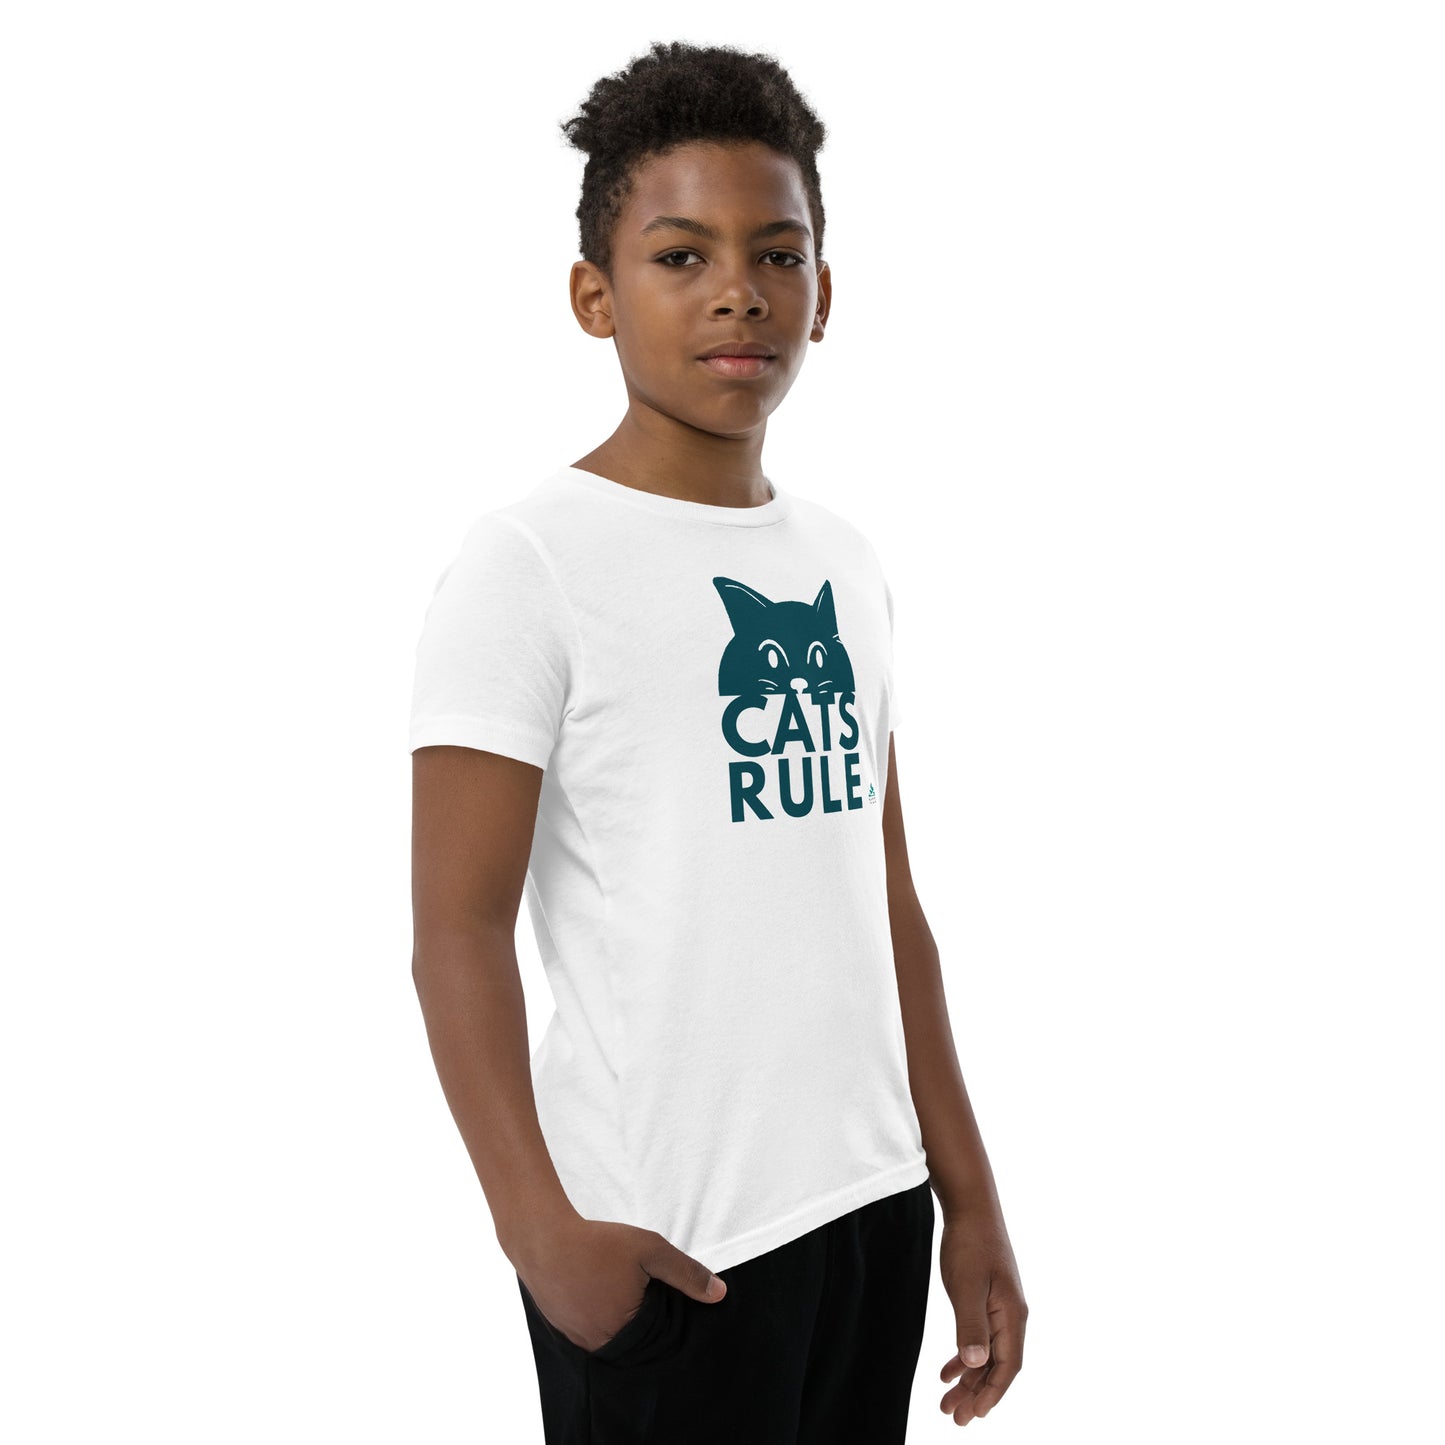 Cats Rule - Youth Short Sleeve T-Shirt